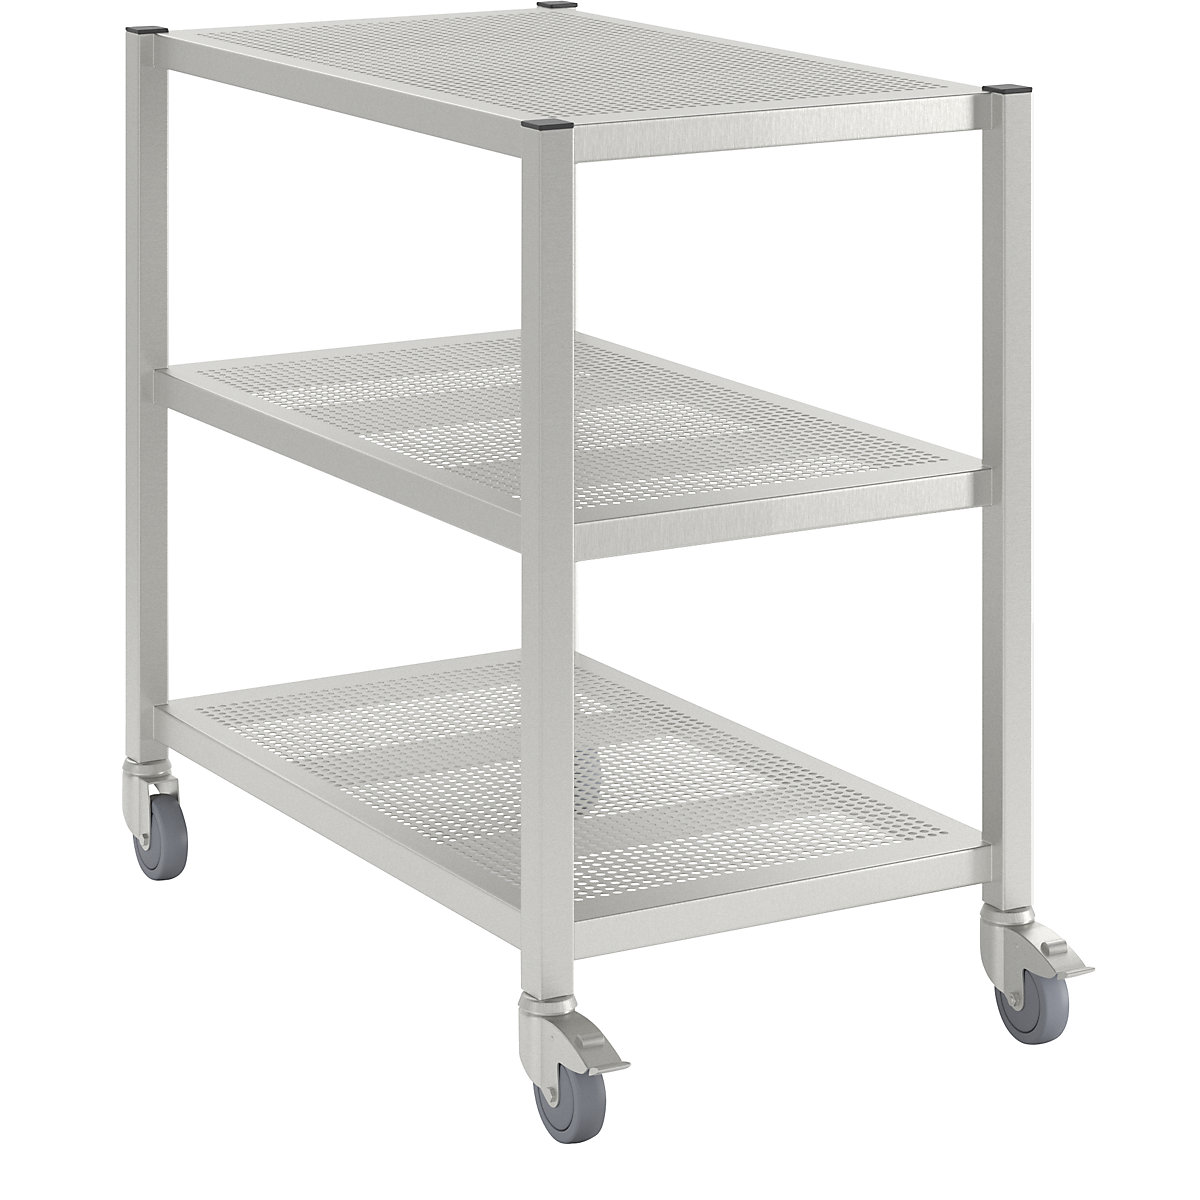 Mobile cleanroom table, made of stainless steel, 3 shelves, length 1000 mm-14